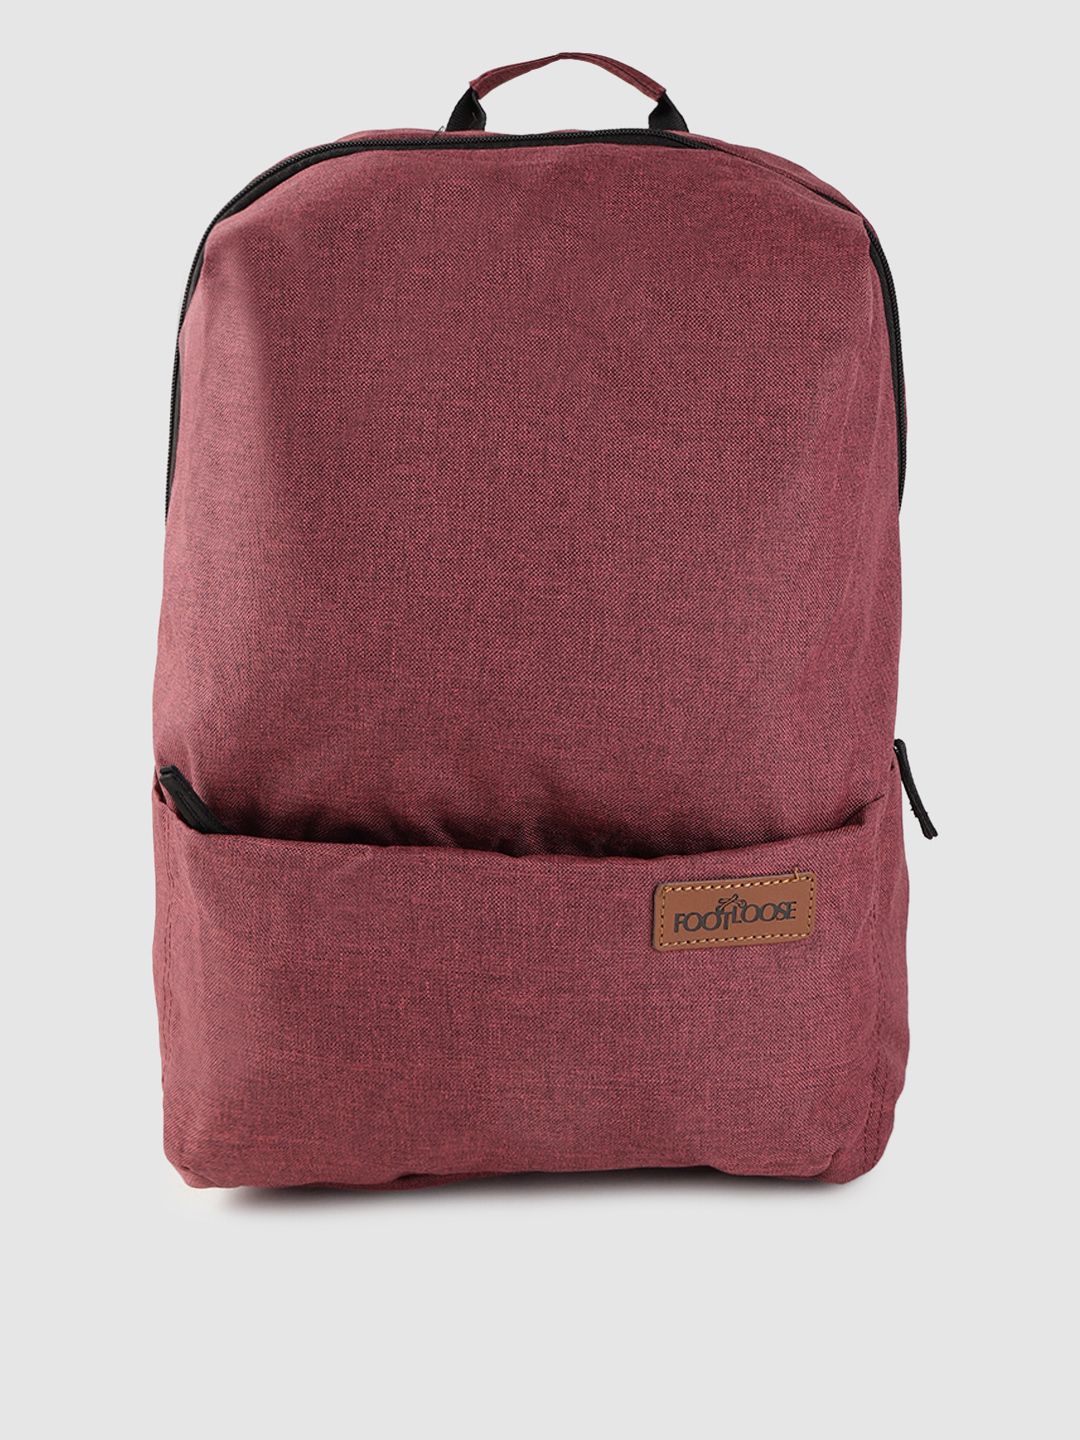 FOOTLOOSE Unisex Brick Red Solid Laptop Backpack Price in India